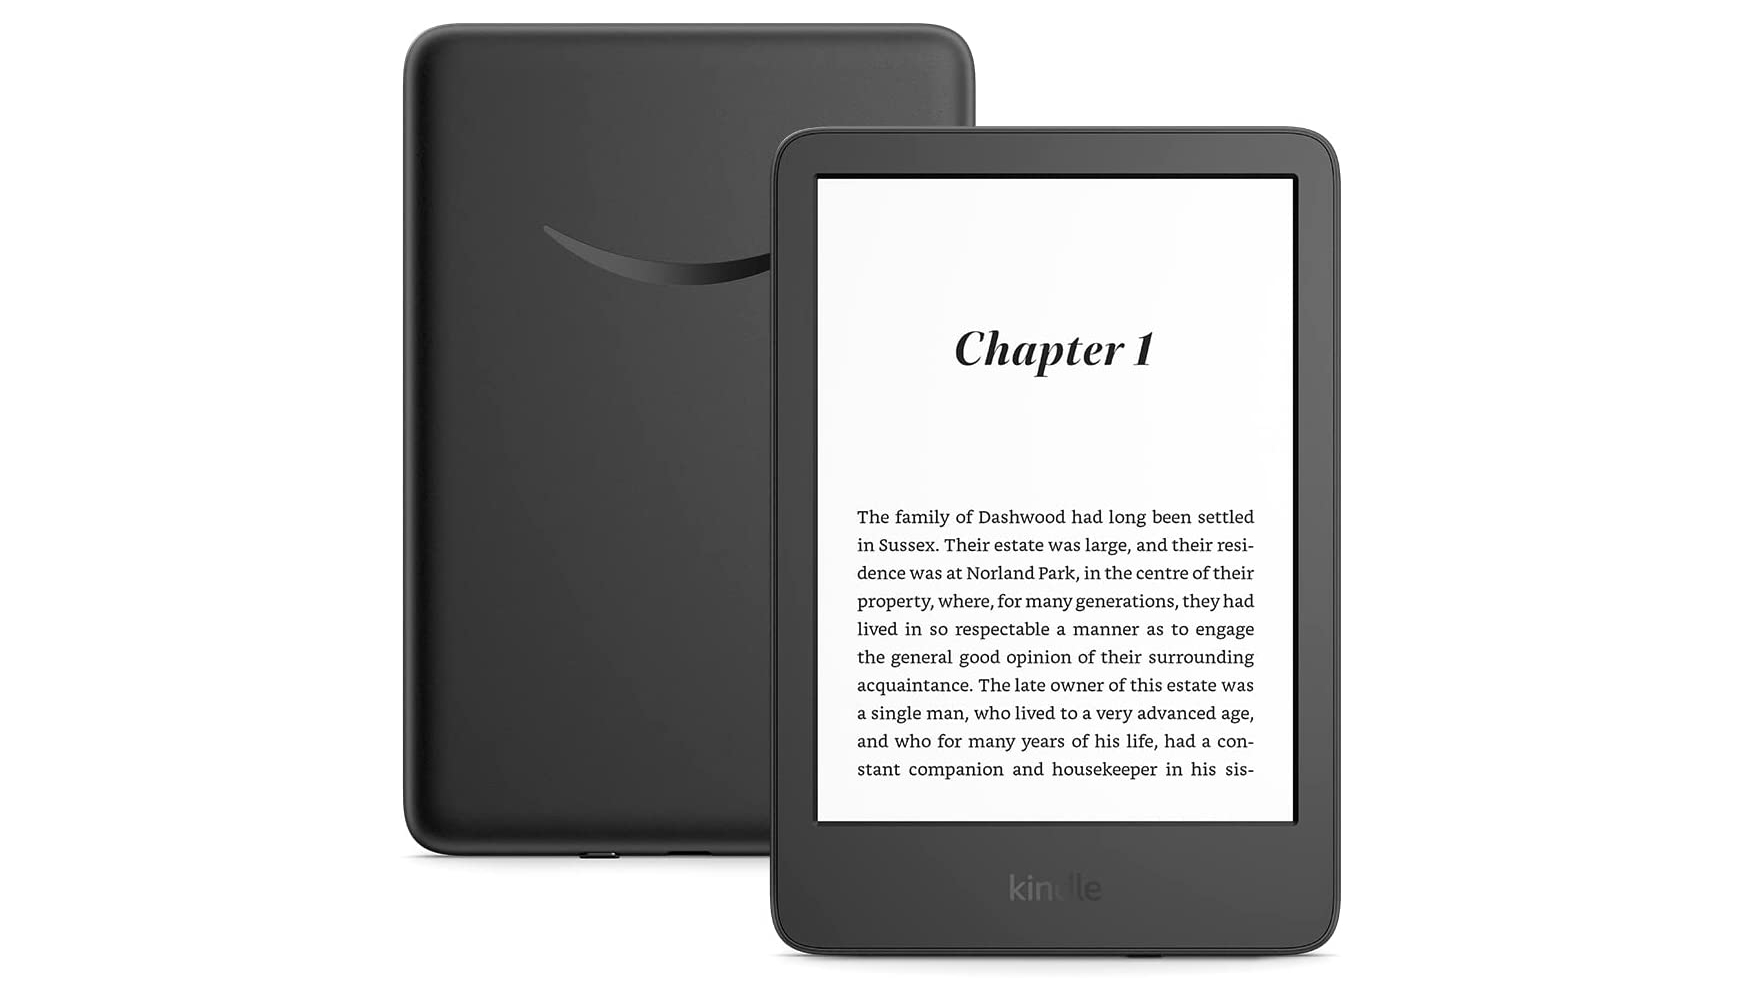 An image of the Kindle 2022 against a white background